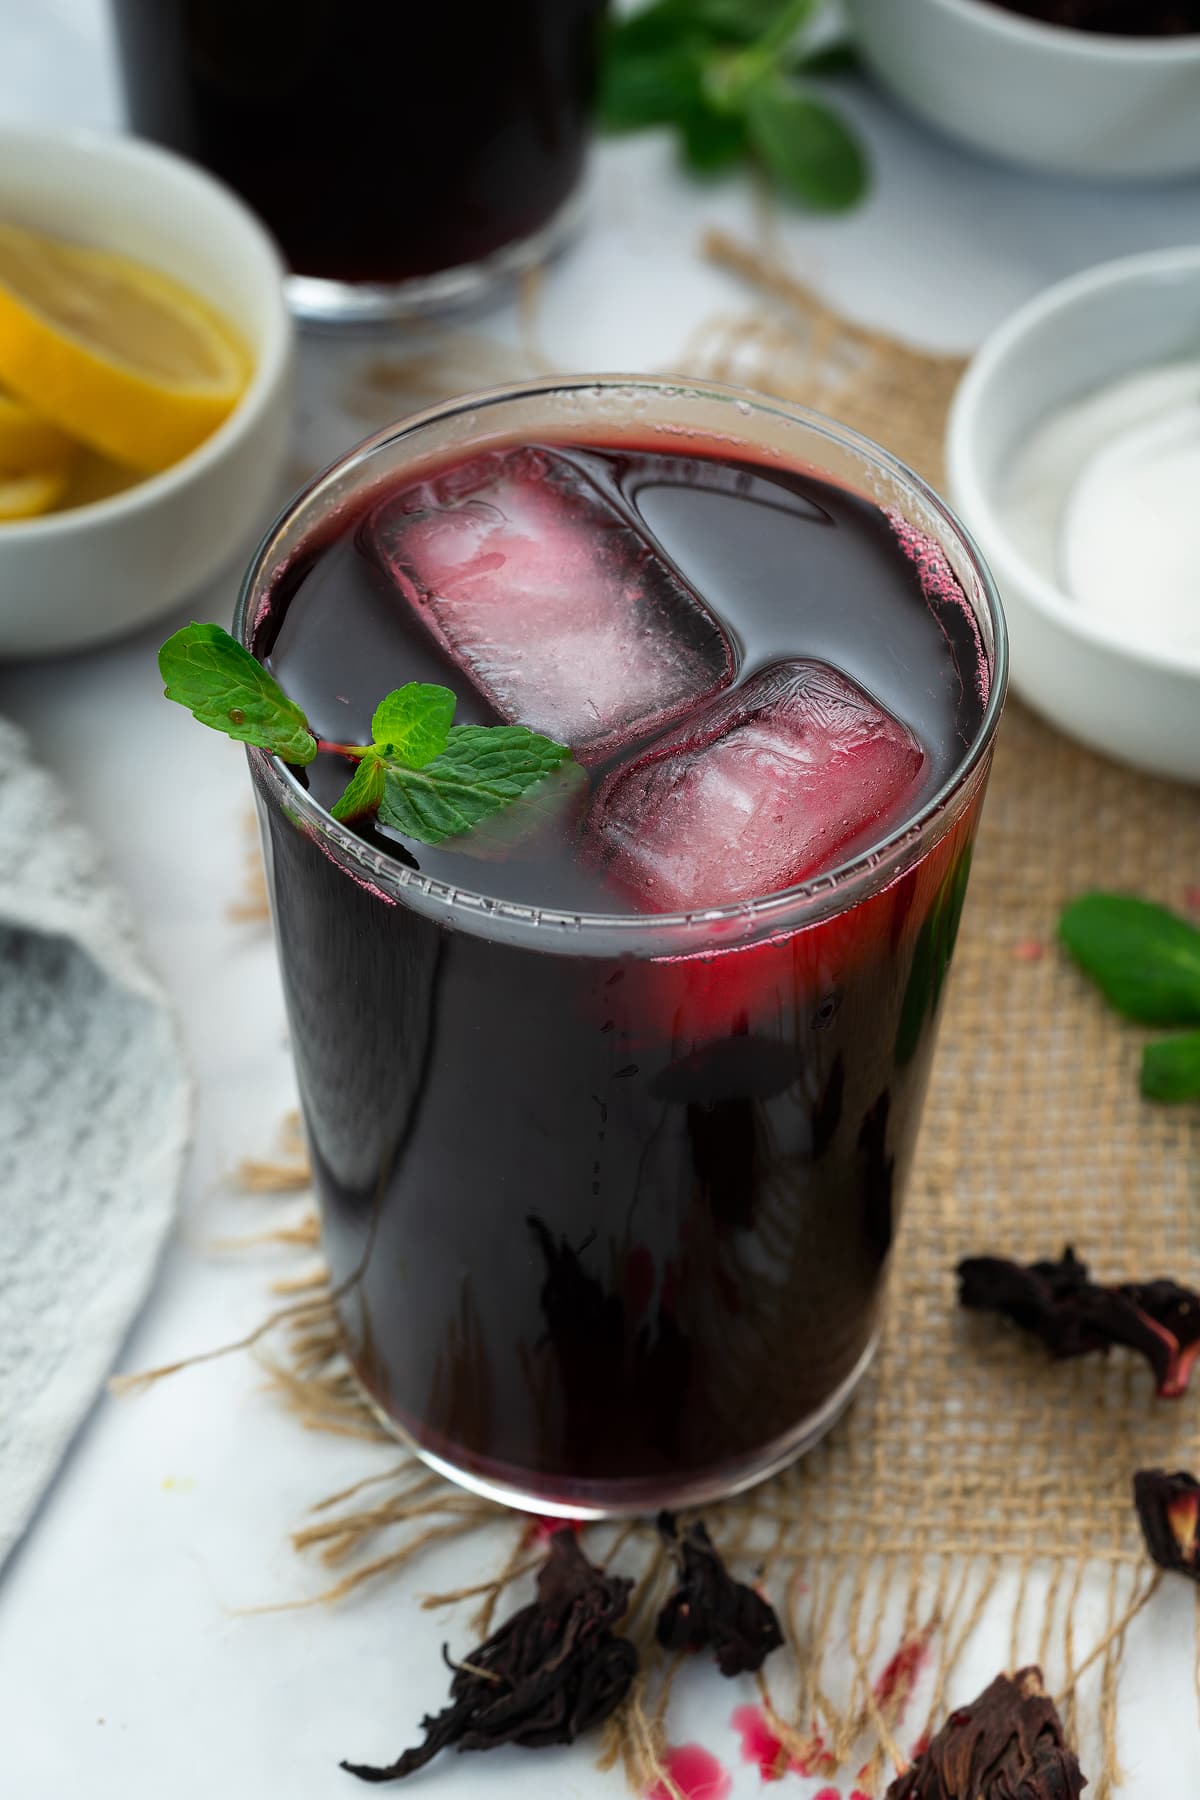 Hibiscus tea (Agua de Jamaica) served in a glass with ice cubes and mint leaves.